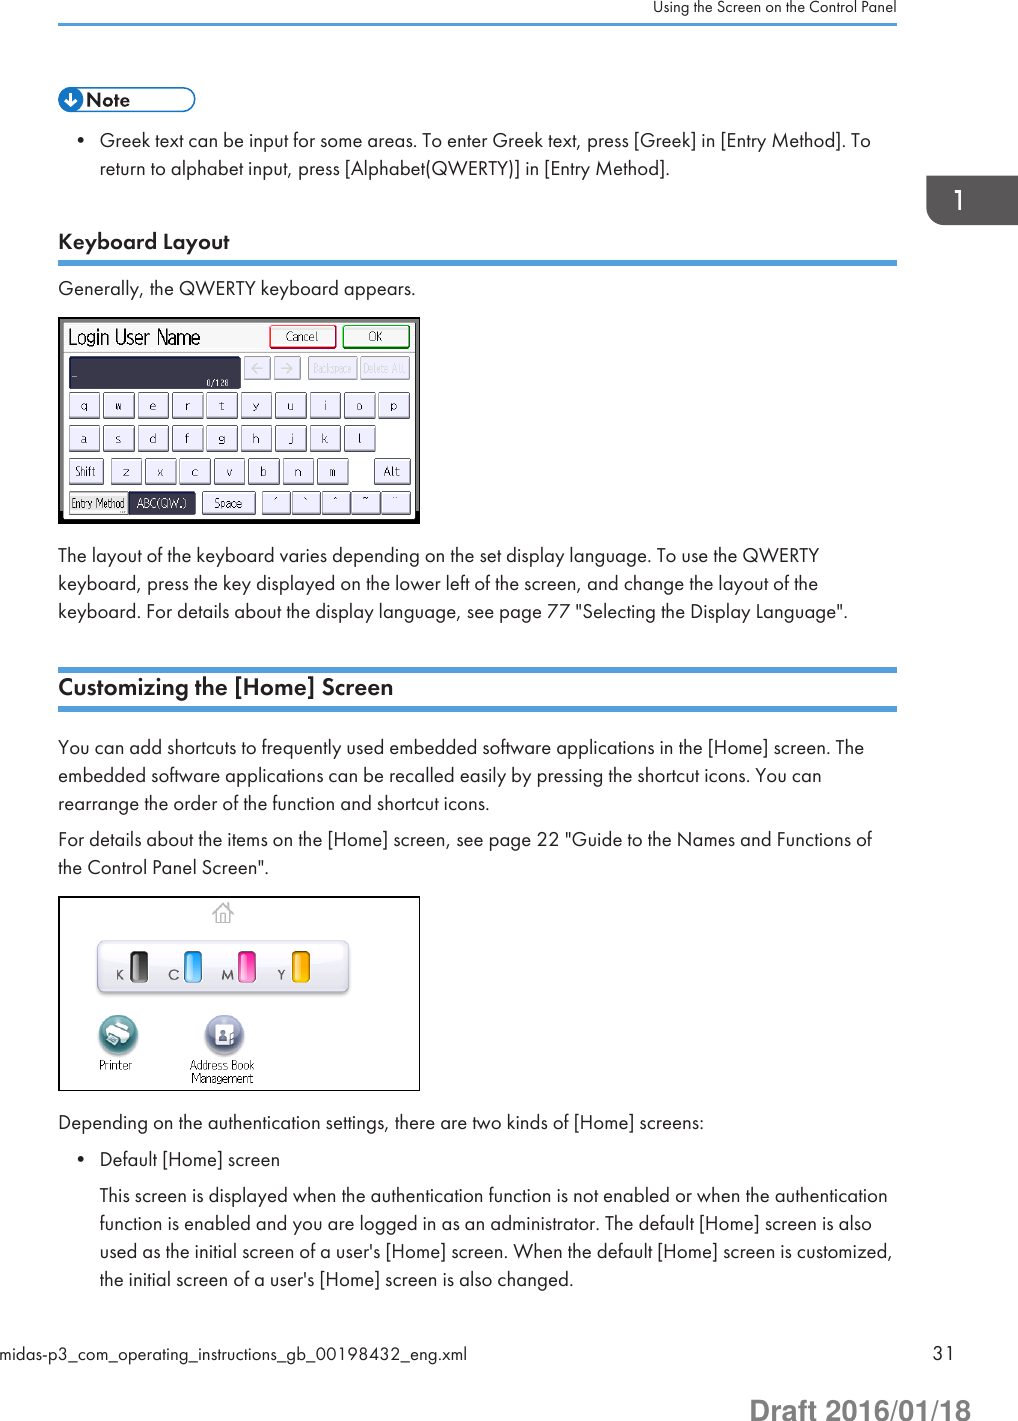 • Greek text can be input for some areas. To enter Greek text, press [Greek] in [Entry Method]. Toreturn to alphabet input, press [Alphabet(QWERTY)] in [Entry Method].Keyboard LayoutGenerally, the QWERTY keyboard appears.The layout of the keyboard varies depending on the set display language. To use the QWERTYkeyboard, press the key displayed on the lower left of the screen, and change the layout of thekeyboard. For details about the display language, see page 77 &quot;Selecting the Display Language&quot;.Customizing the [Home] ScreenYou can add shortcuts to frequently used embedded software applications in the [Home] screen. Theembedded software applications can be recalled easily by pressing the shortcut icons. You canrearrange the order of the function and shortcut icons.For details about the items on the [Home] screen, see page 22 &quot;Guide to the Names and Functions ofthe Control Panel Screen&quot;.Depending on the authentication settings, there are two kinds of [Home] screens:• Default [Home] screenThis screen is displayed when the authentication function is not enabled or when the authenticationfunction is enabled and you are logged in as an administrator. The default [Home] screen is alsoused as the initial screen of a user&apos;s [Home] screen. When the default [Home] screen is customized,the initial screen of a user&apos;s [Home] screen is also changed.Using the Screen on the Control Panelmidas-p3_com_operating_instructions_gb_00198432_eng.xml 31Draft 2016/01/18